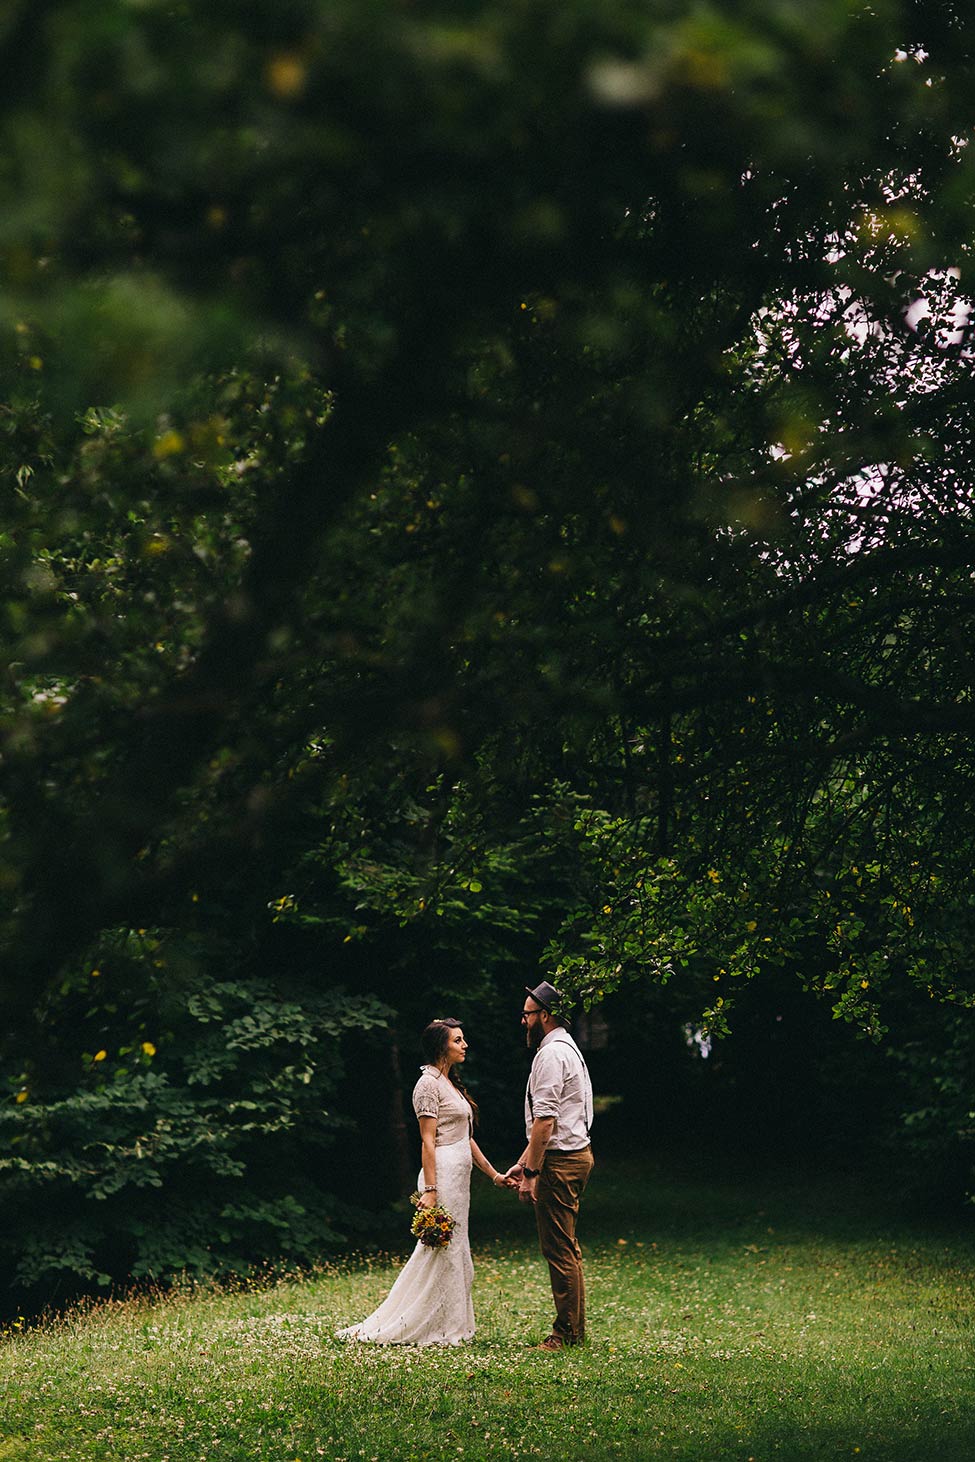 Get lost during your wedding portraits.